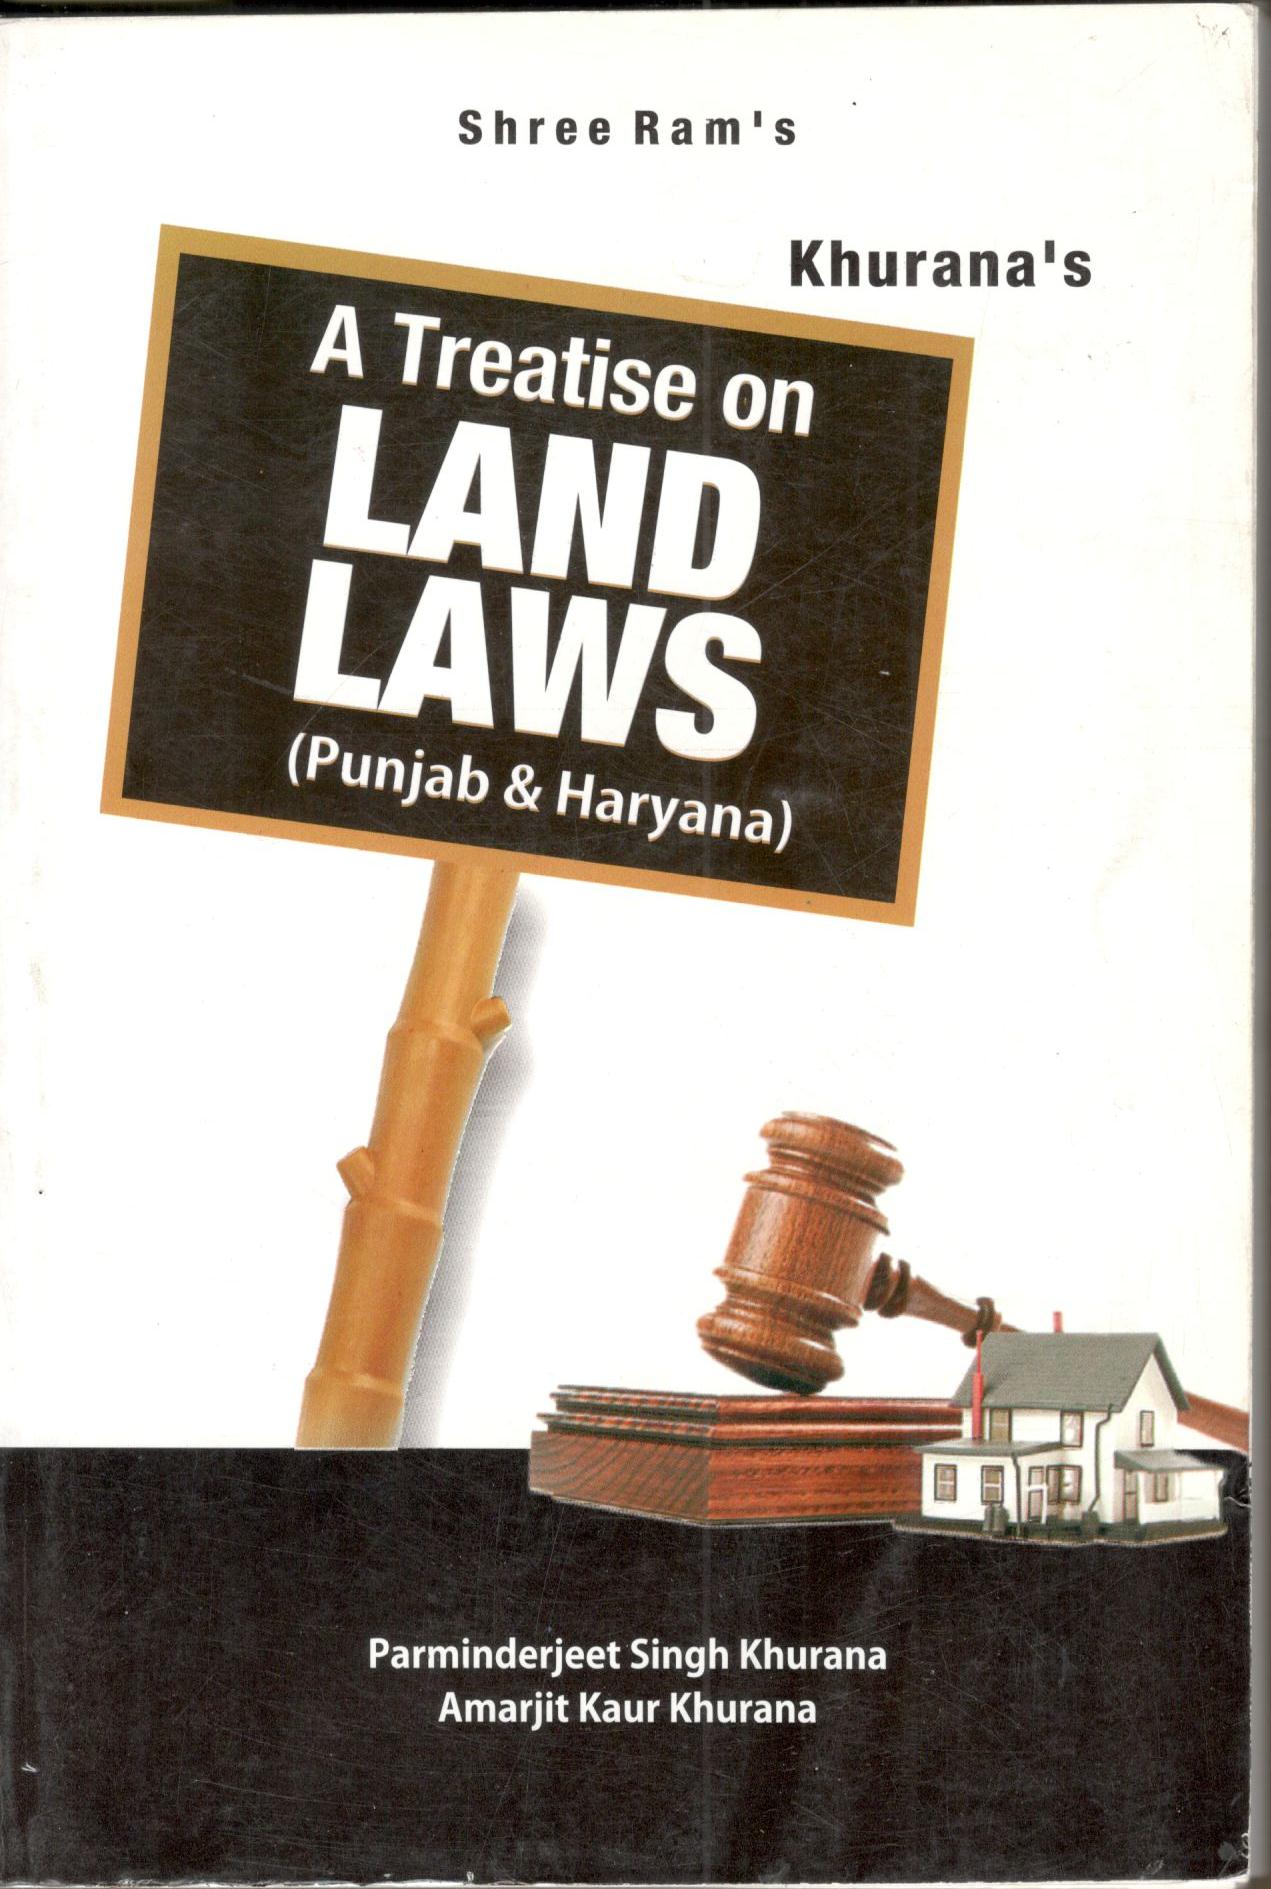 2013 A Treatise on Land Laws PH 3rd Edition